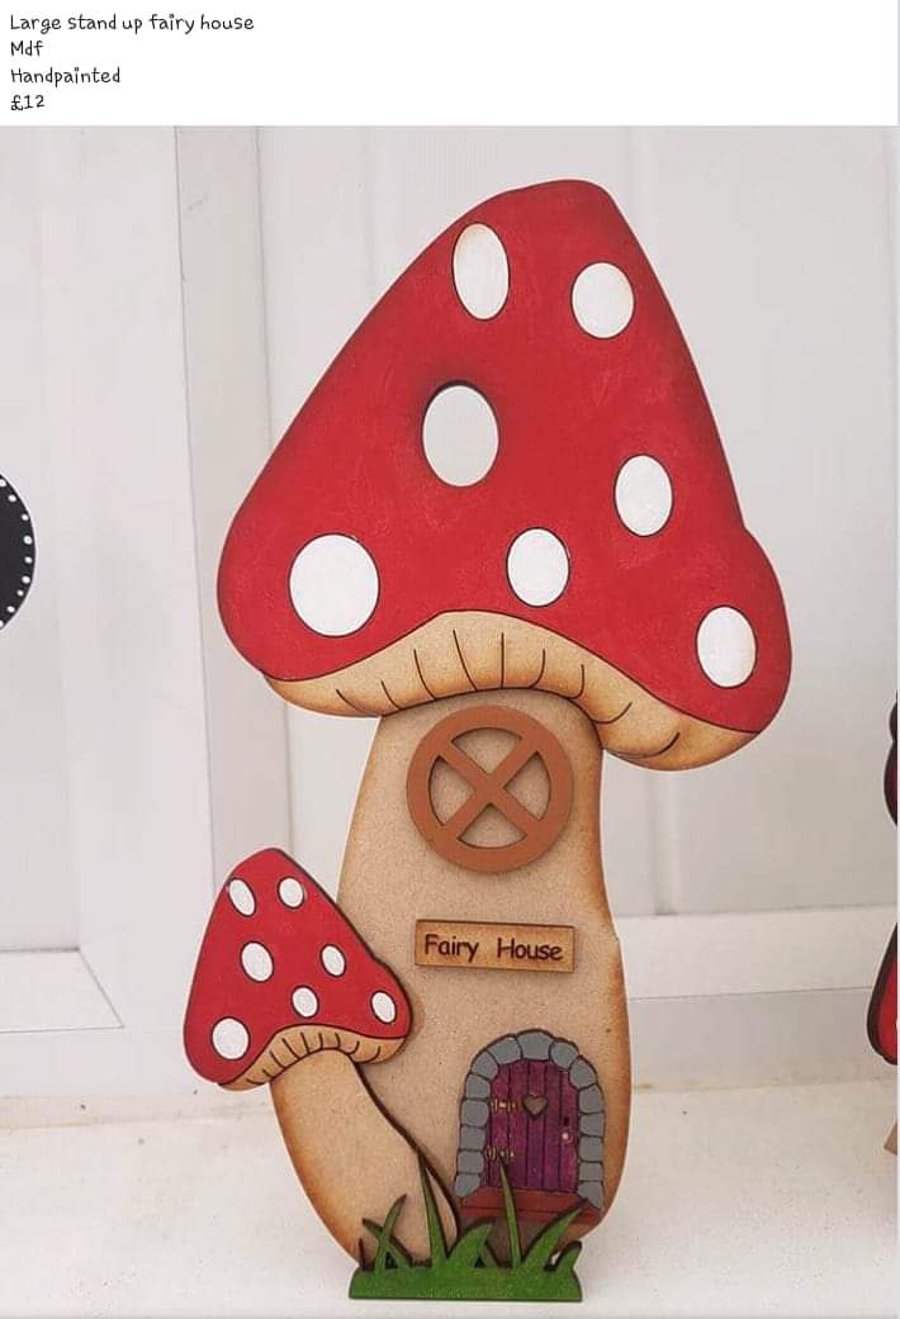 Stand up wooden fairy house